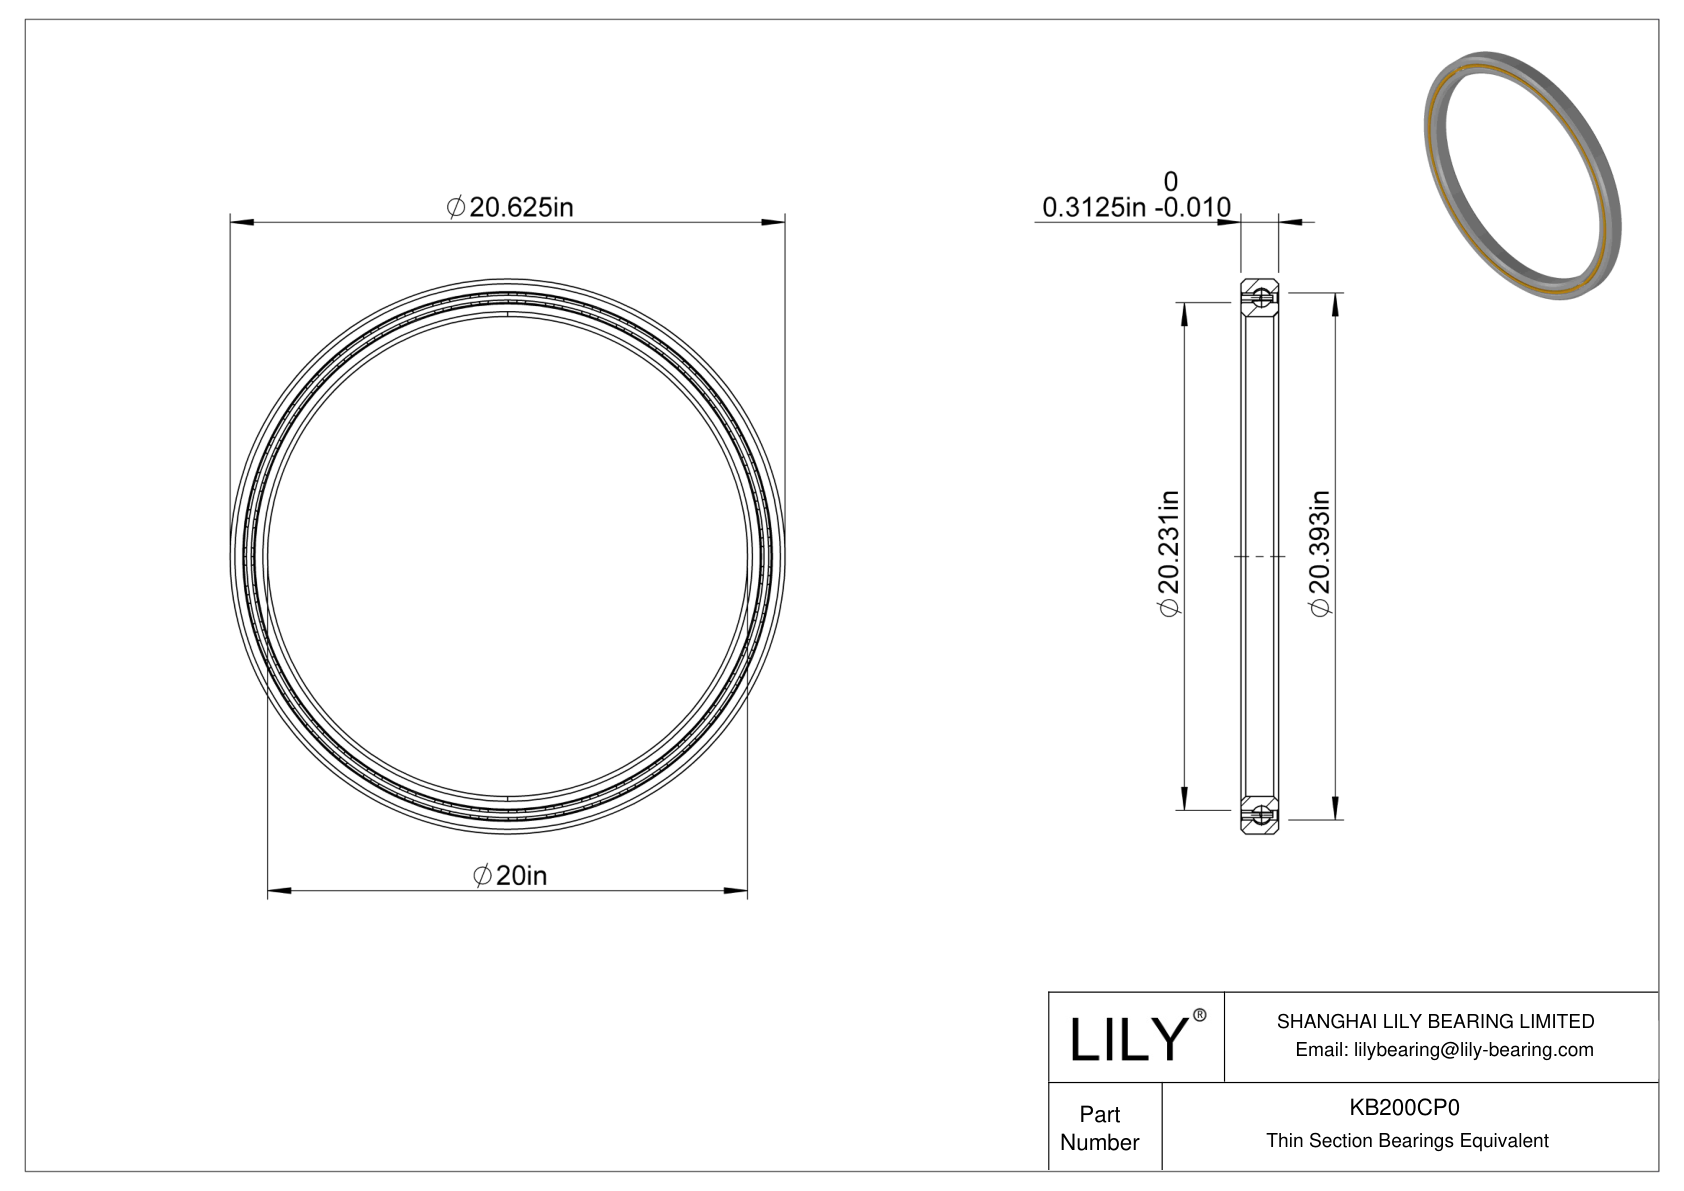 KB200CP0 Constant Section (CS) Bearings cad drawing